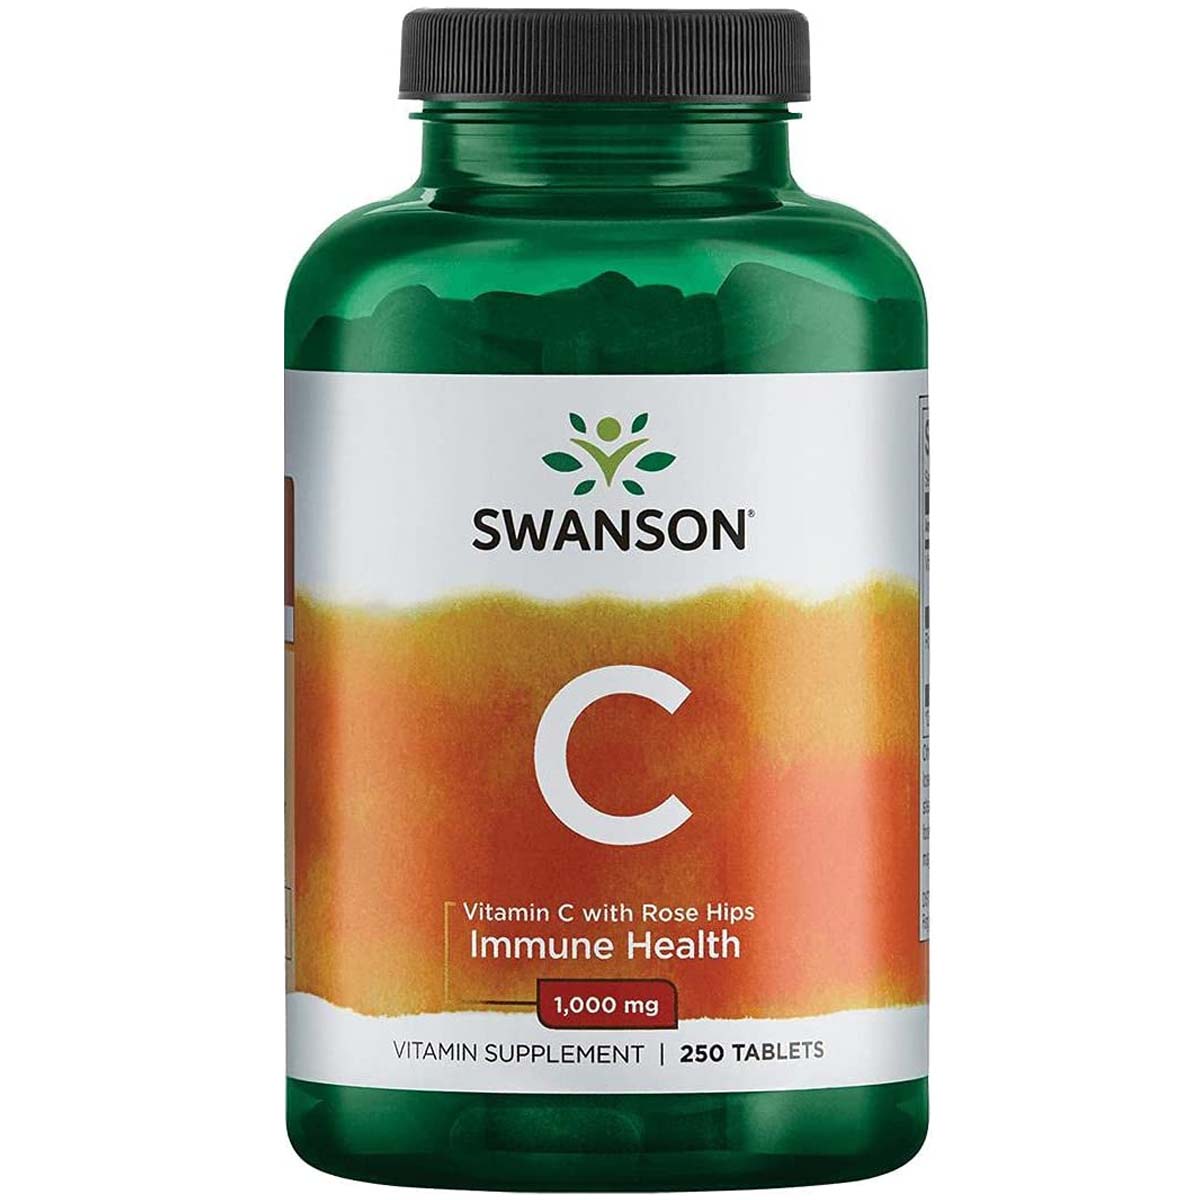 Swanson Vitamin C with Rose Hips, 1000 mg, 250 Tablets